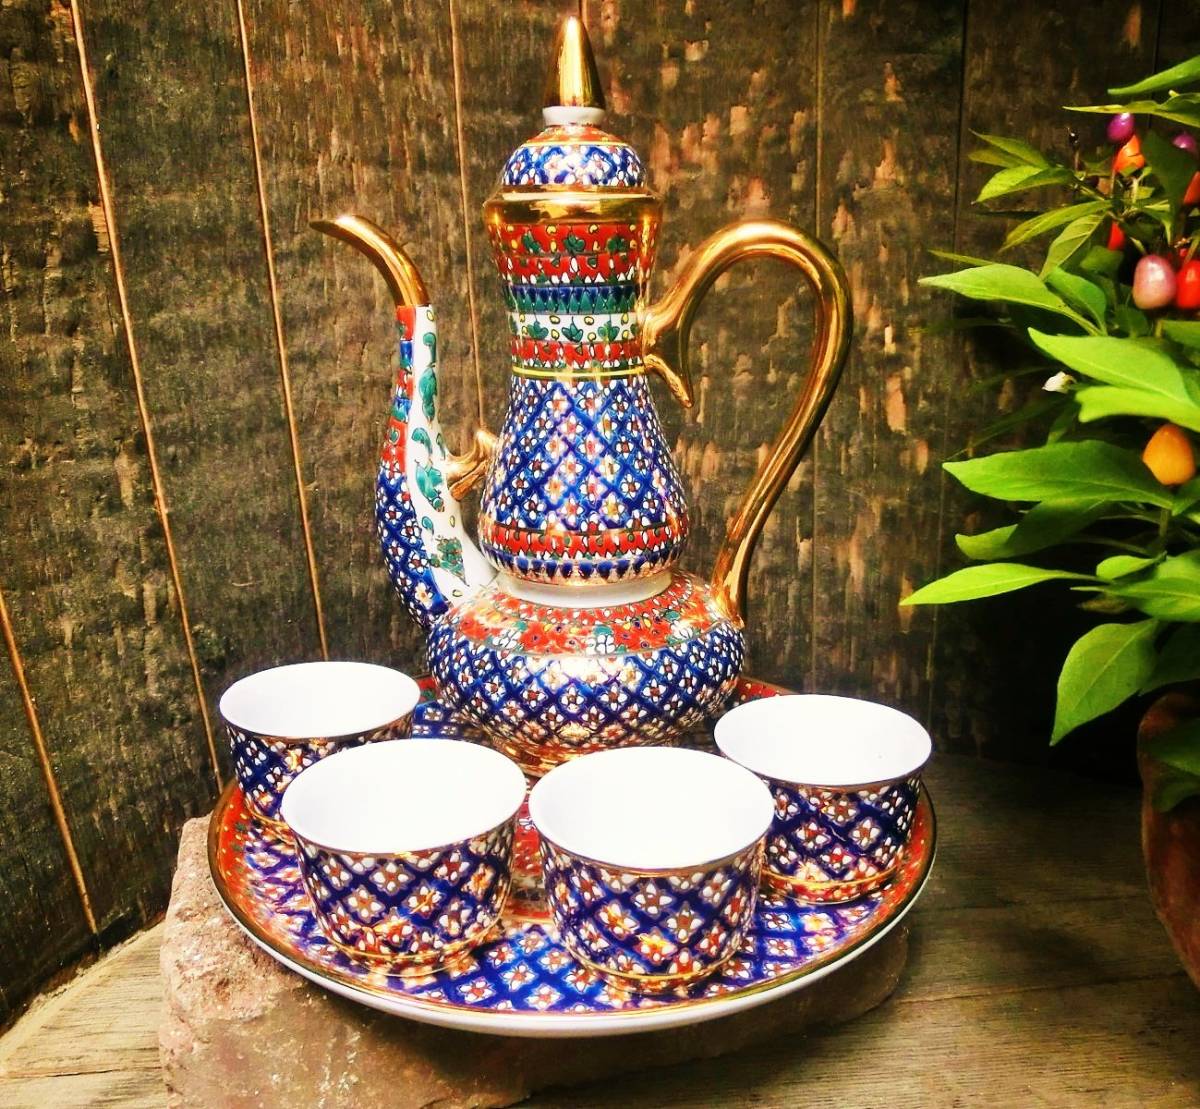 One-of-a-kind ☆ Brand new ☆ [Kingdom of Thailand] Traditional craft Benjarong pottery tea set ④ Luxury Gorgeous Blue Handmade, Japanese tableware, dish, small plate